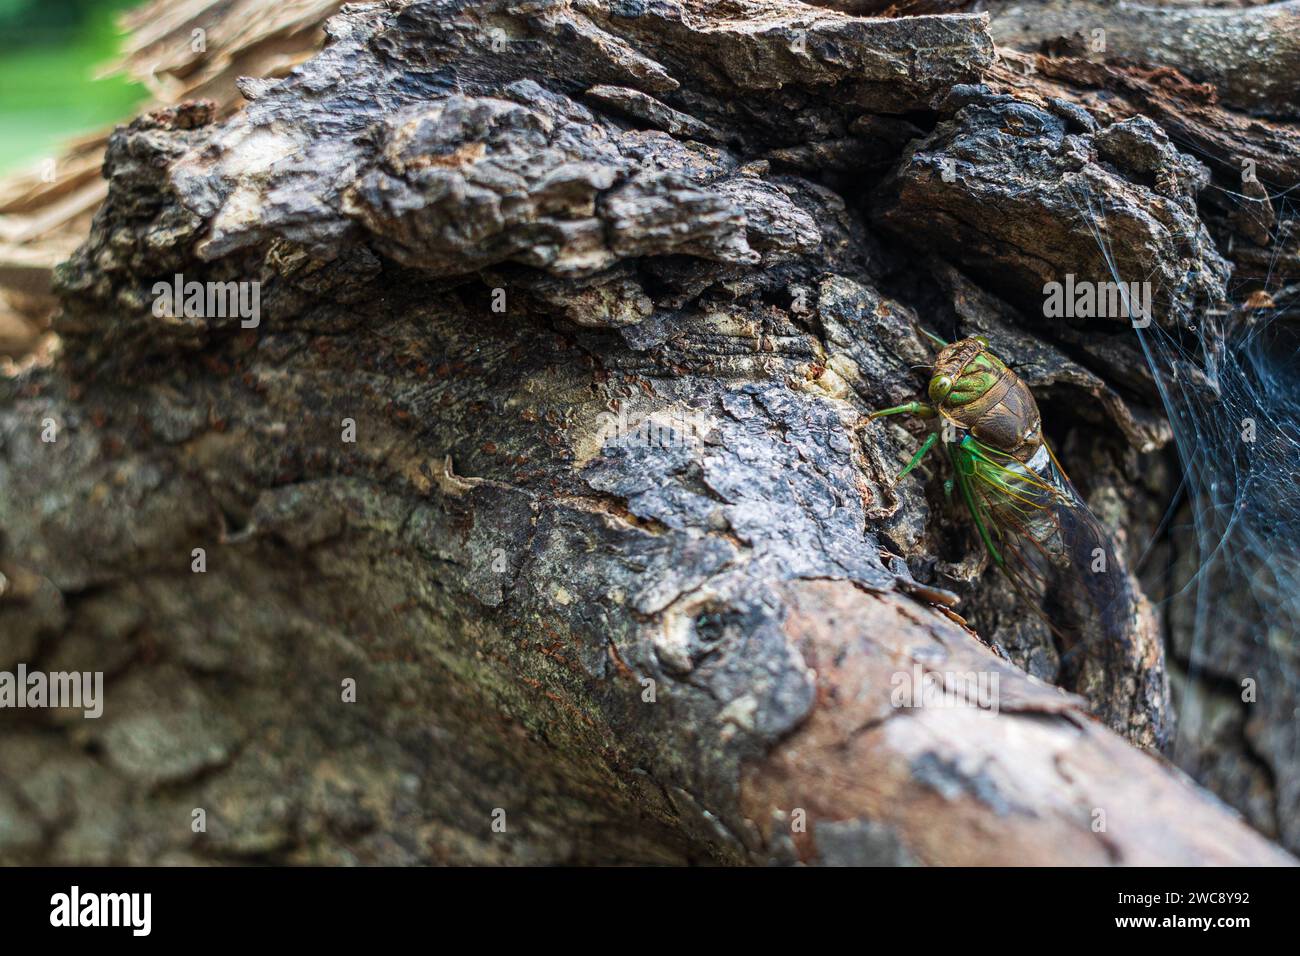 A green beetle sits on a large tree branch downed after a severe storm in an Atlanta park. Stock Photo